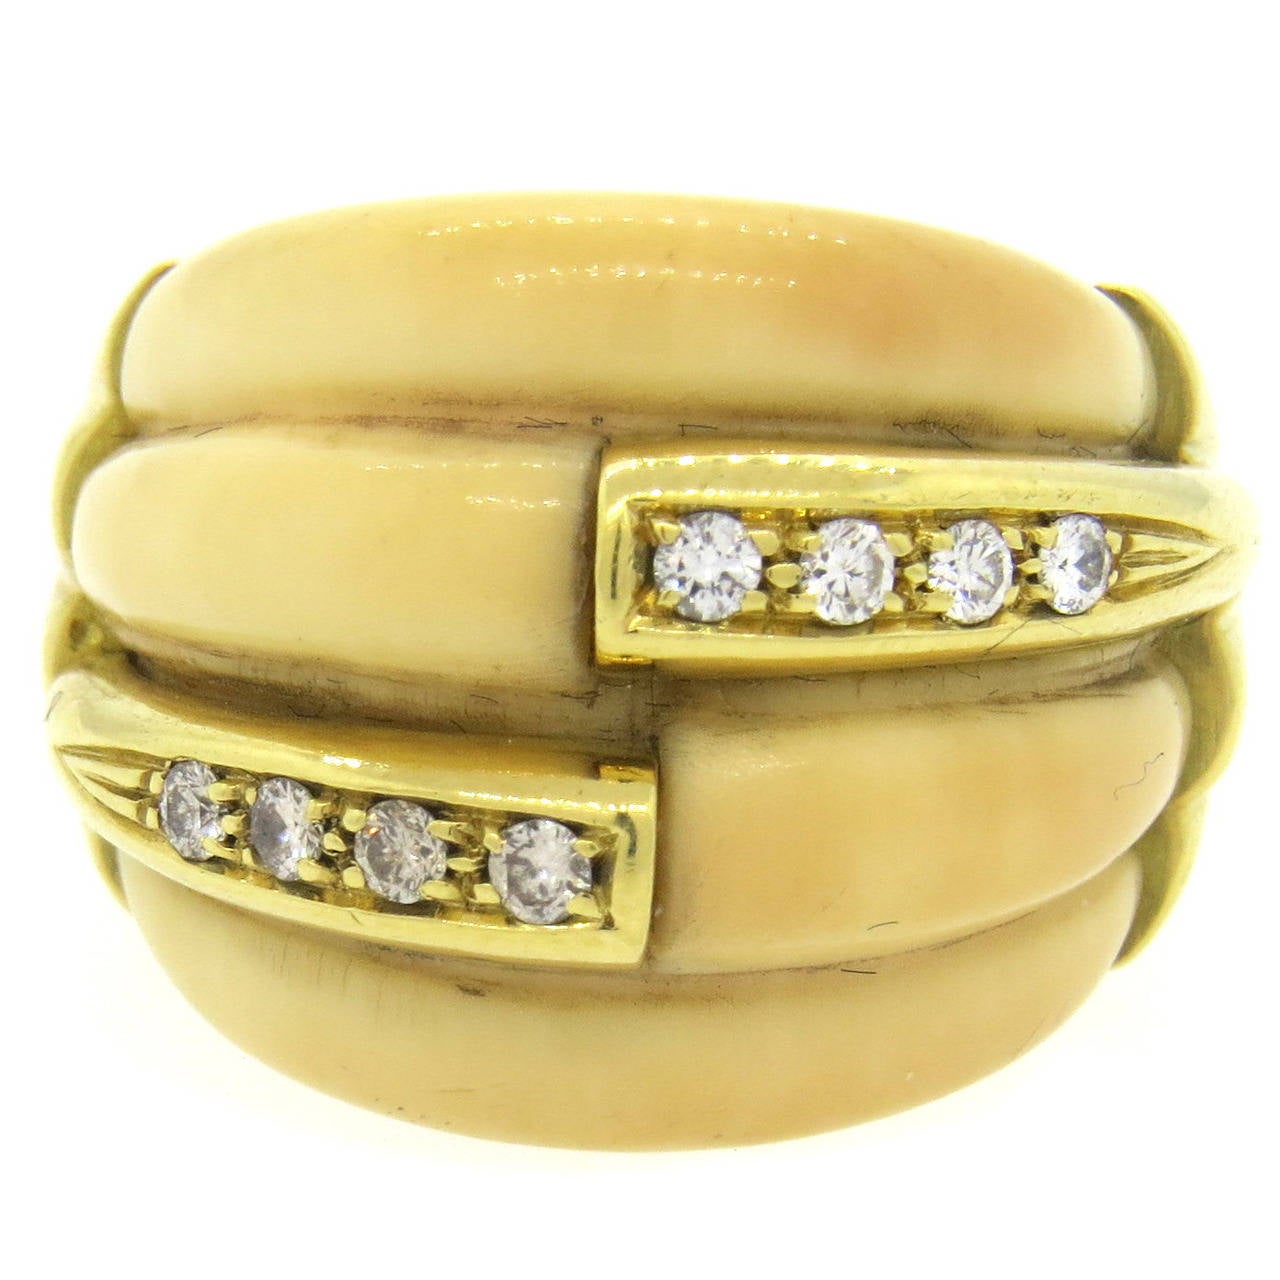 1970s H Stern Gold Diamond Dome RIng